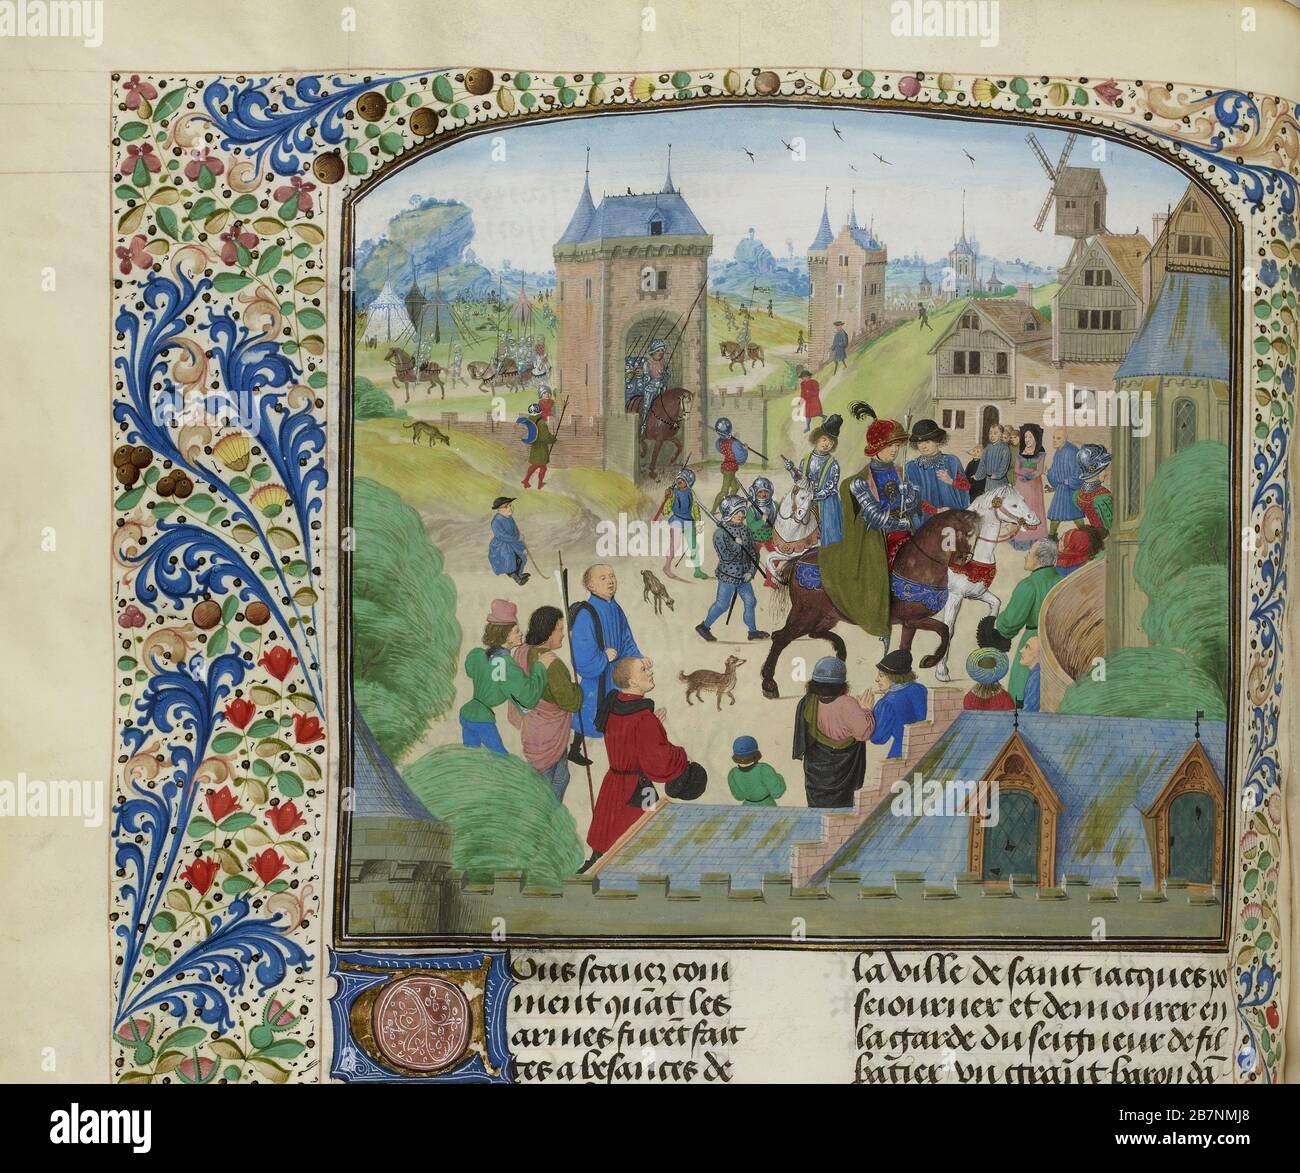 Capture of Orense by the English army, 1387 (Miniature from the Grandes Chroniques de France by Jean Froissart), ca 1470-1475. Found in the Collection of Biblioth&#xe8;que Nationale de France. Stock Photo